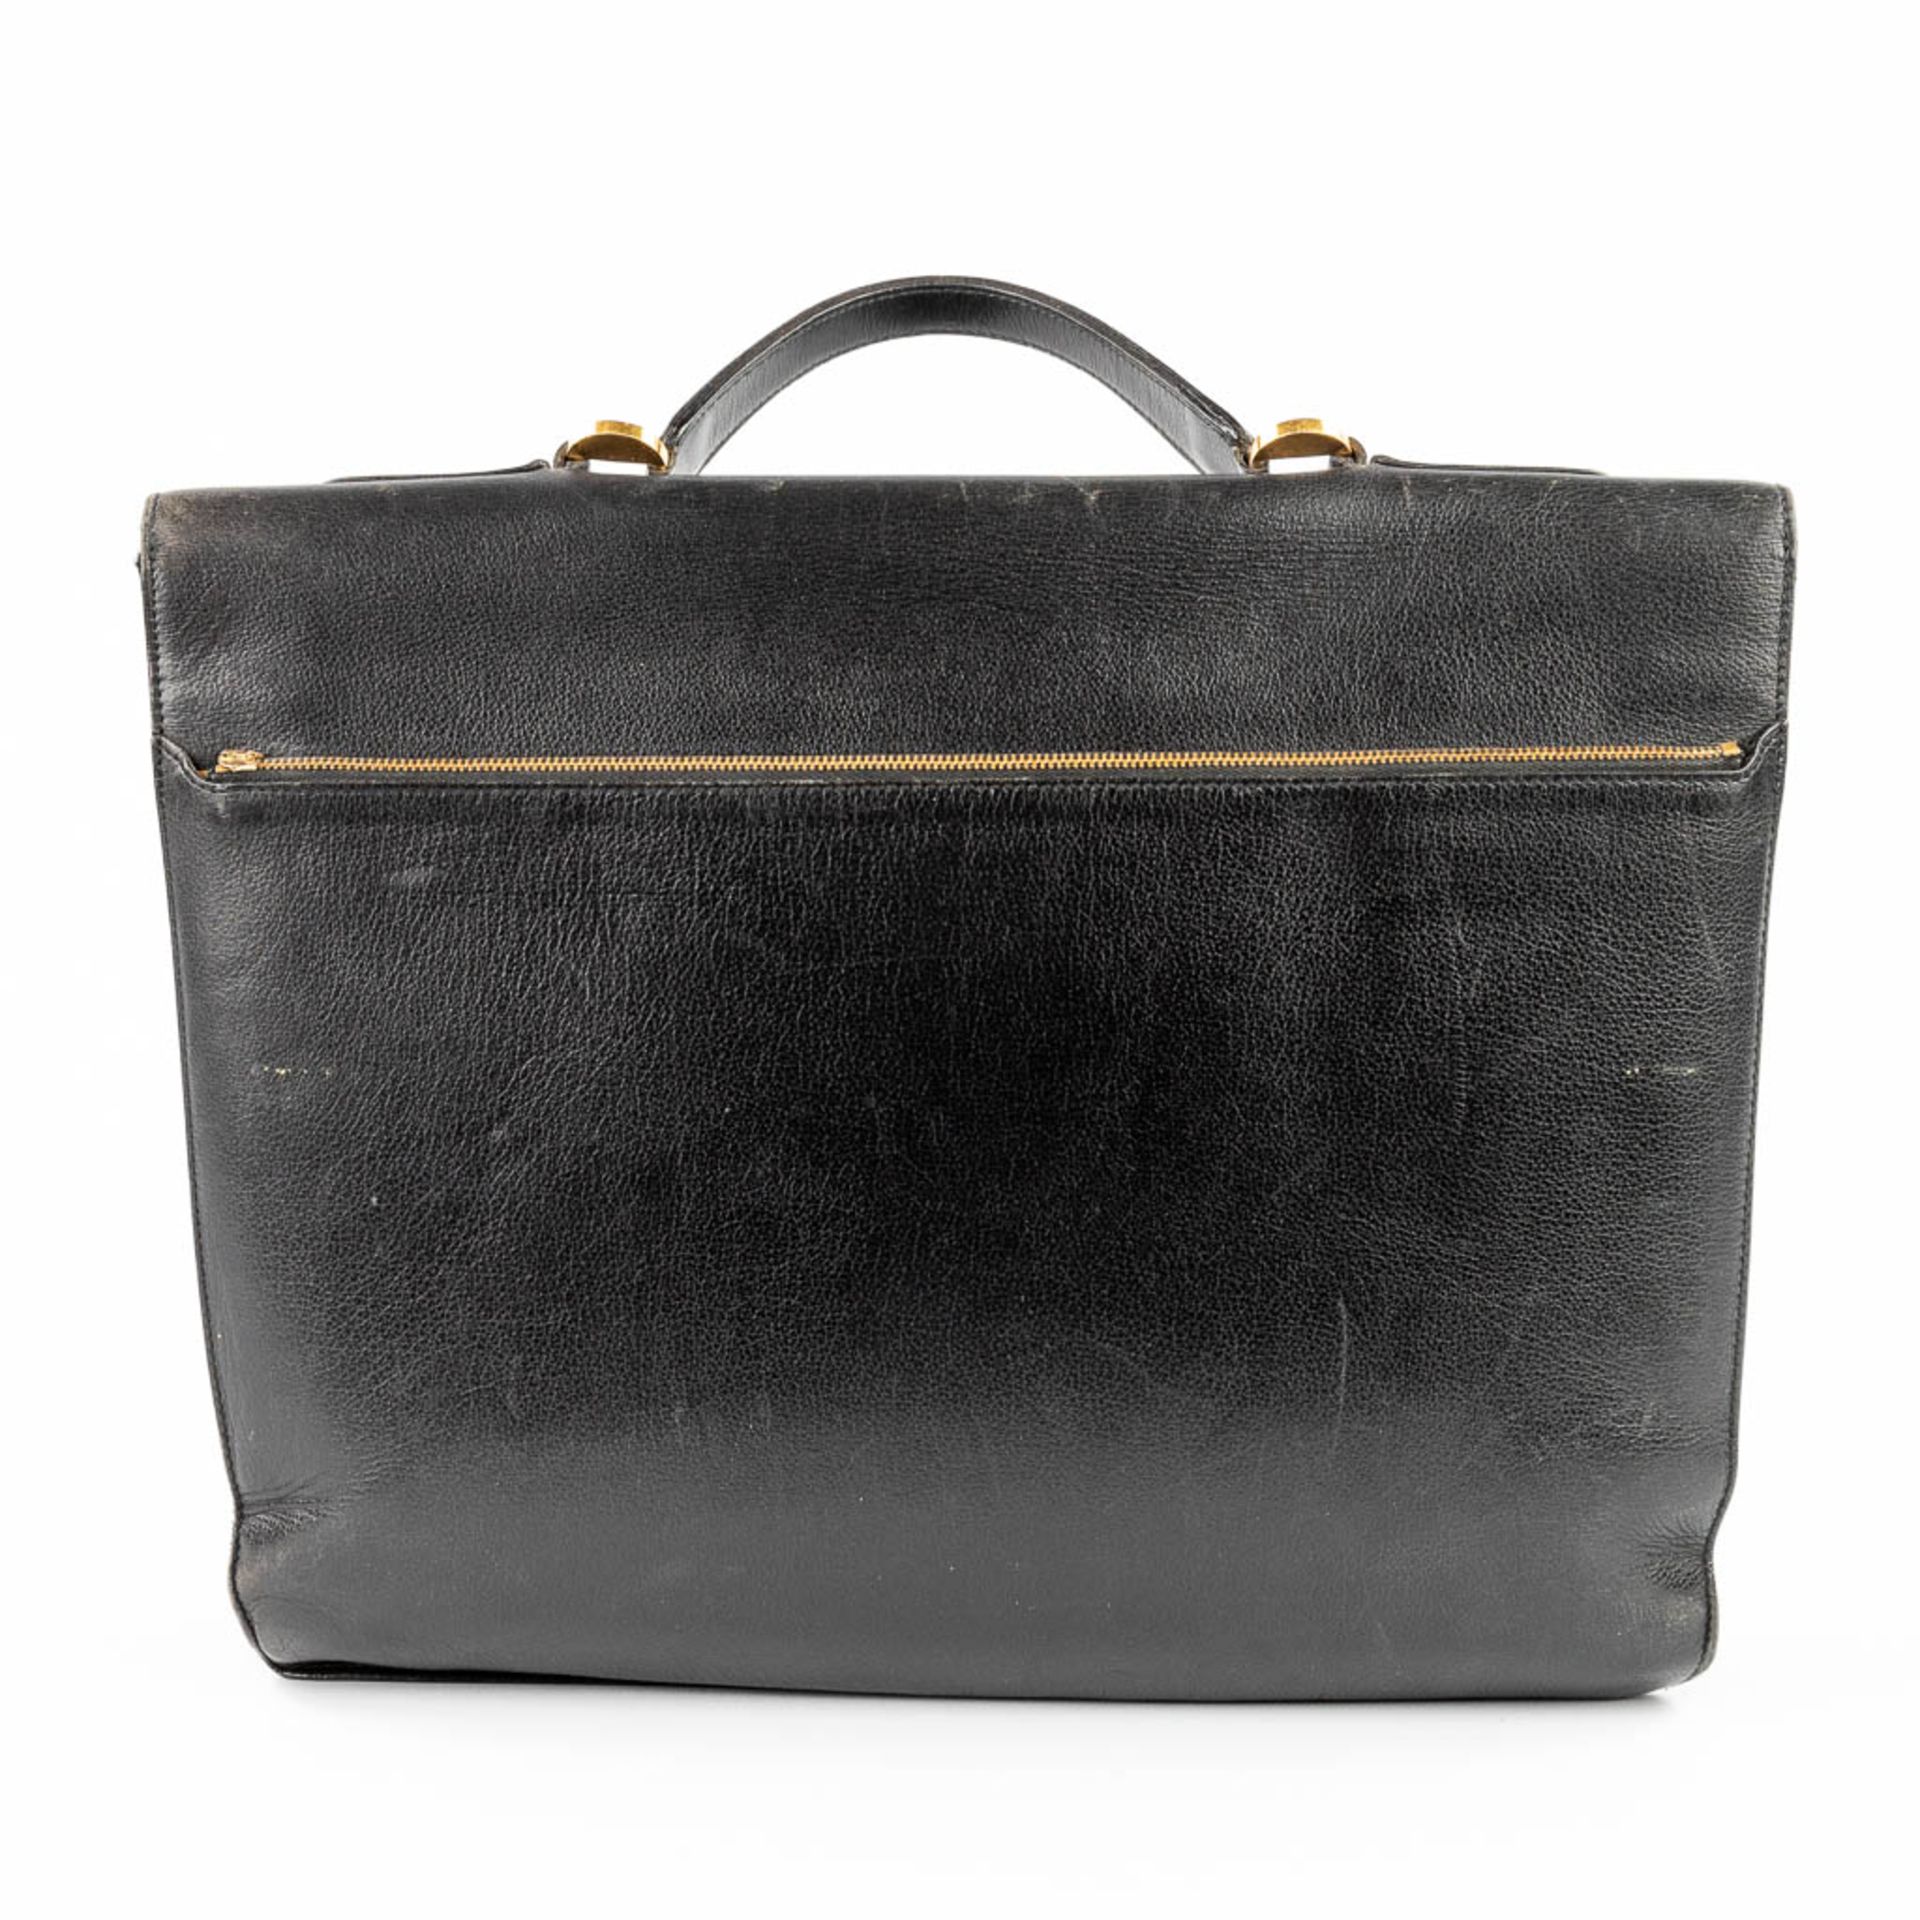 Delvaux, a suitcase made of black leather with gold-plated elements. (W:39 x H:33 cm) - Image 6 of 16